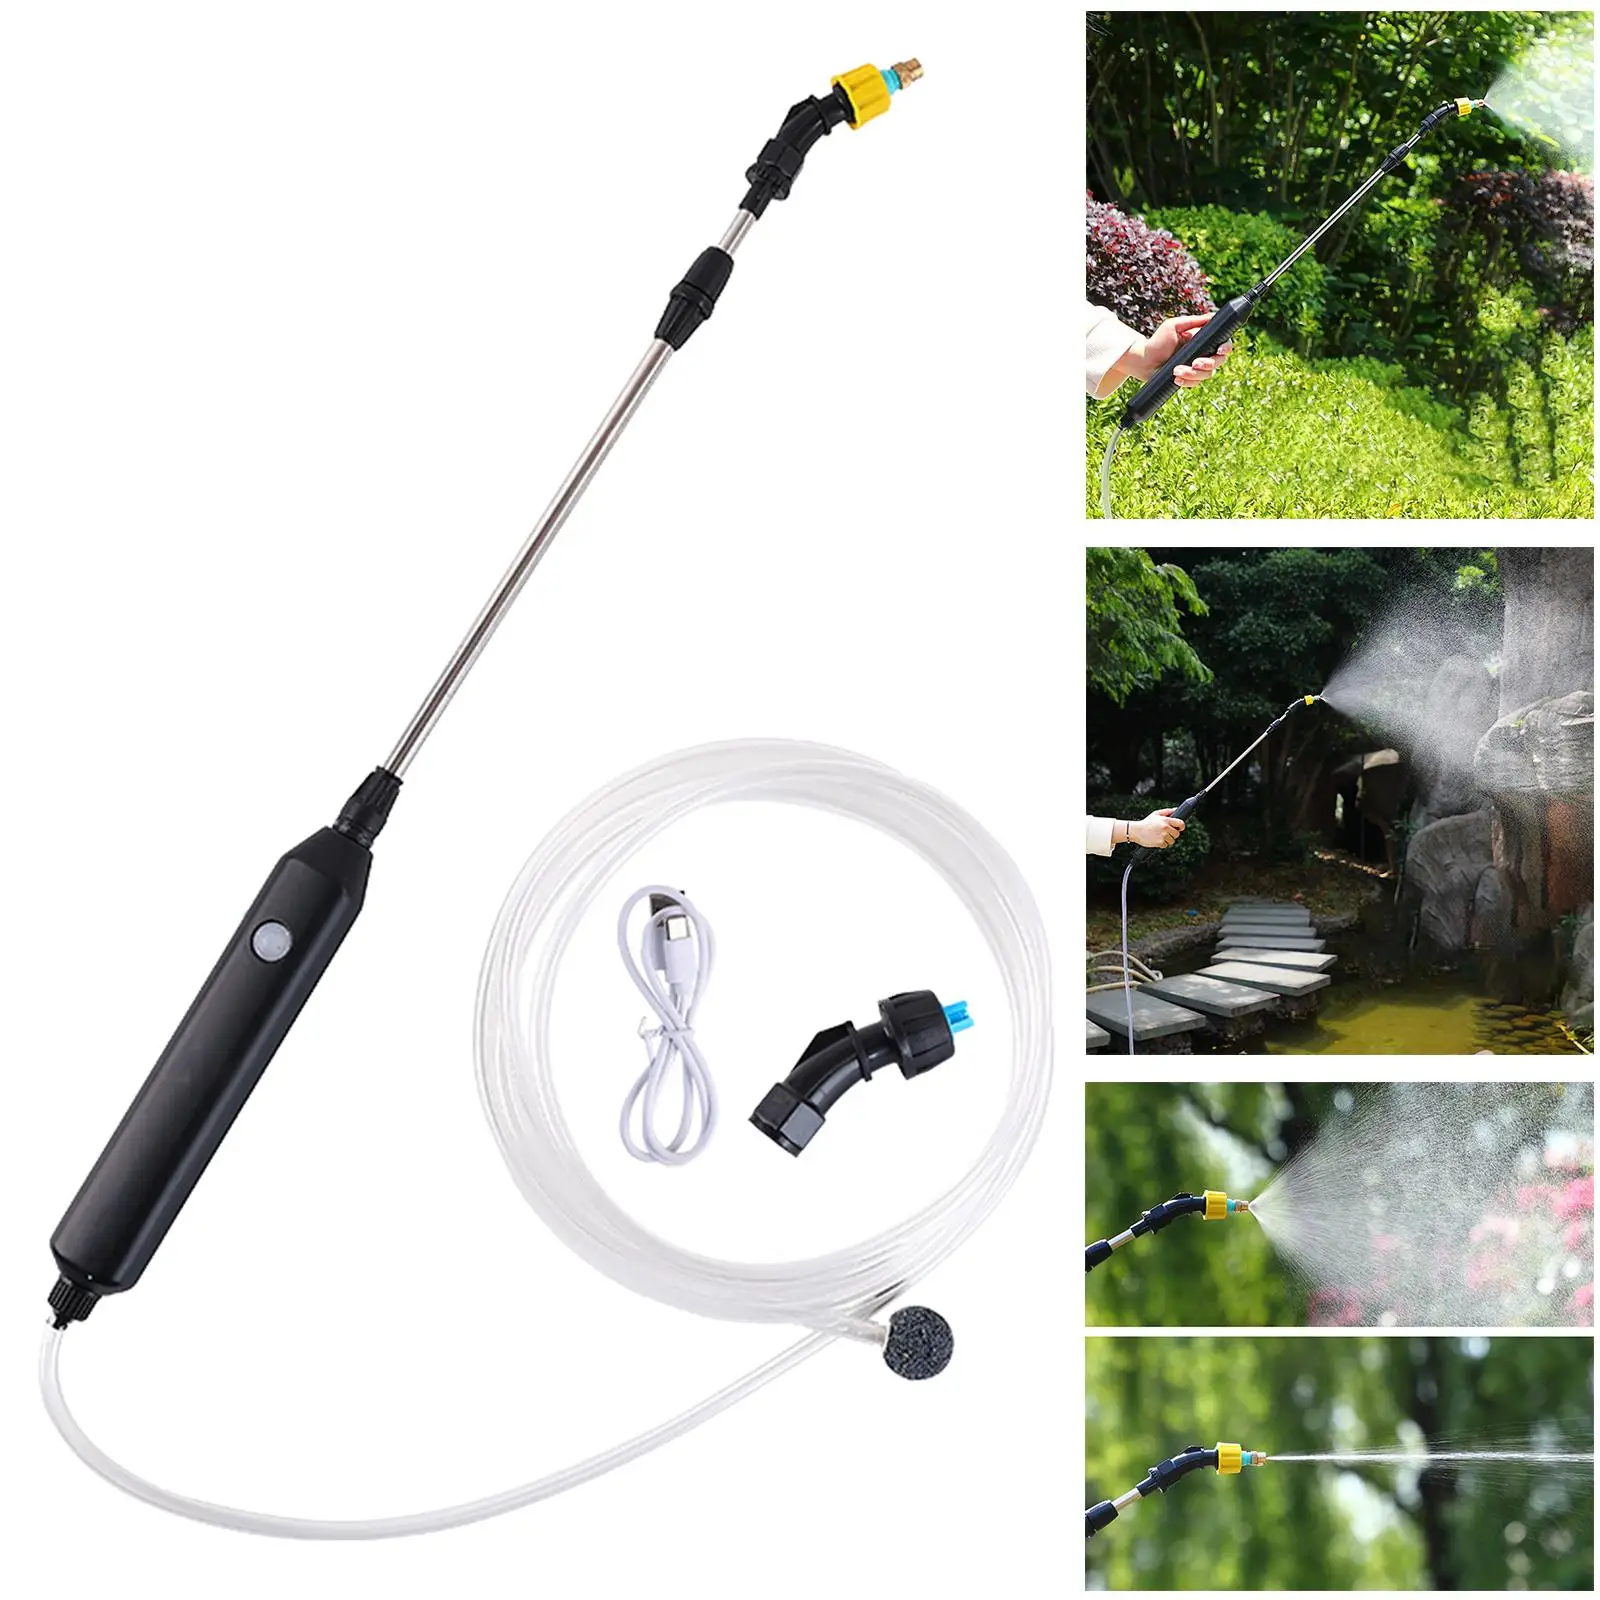 Handheld Garden Sprayer Spray Bottle Attachment Rechargeable for Window Cleaning Tool